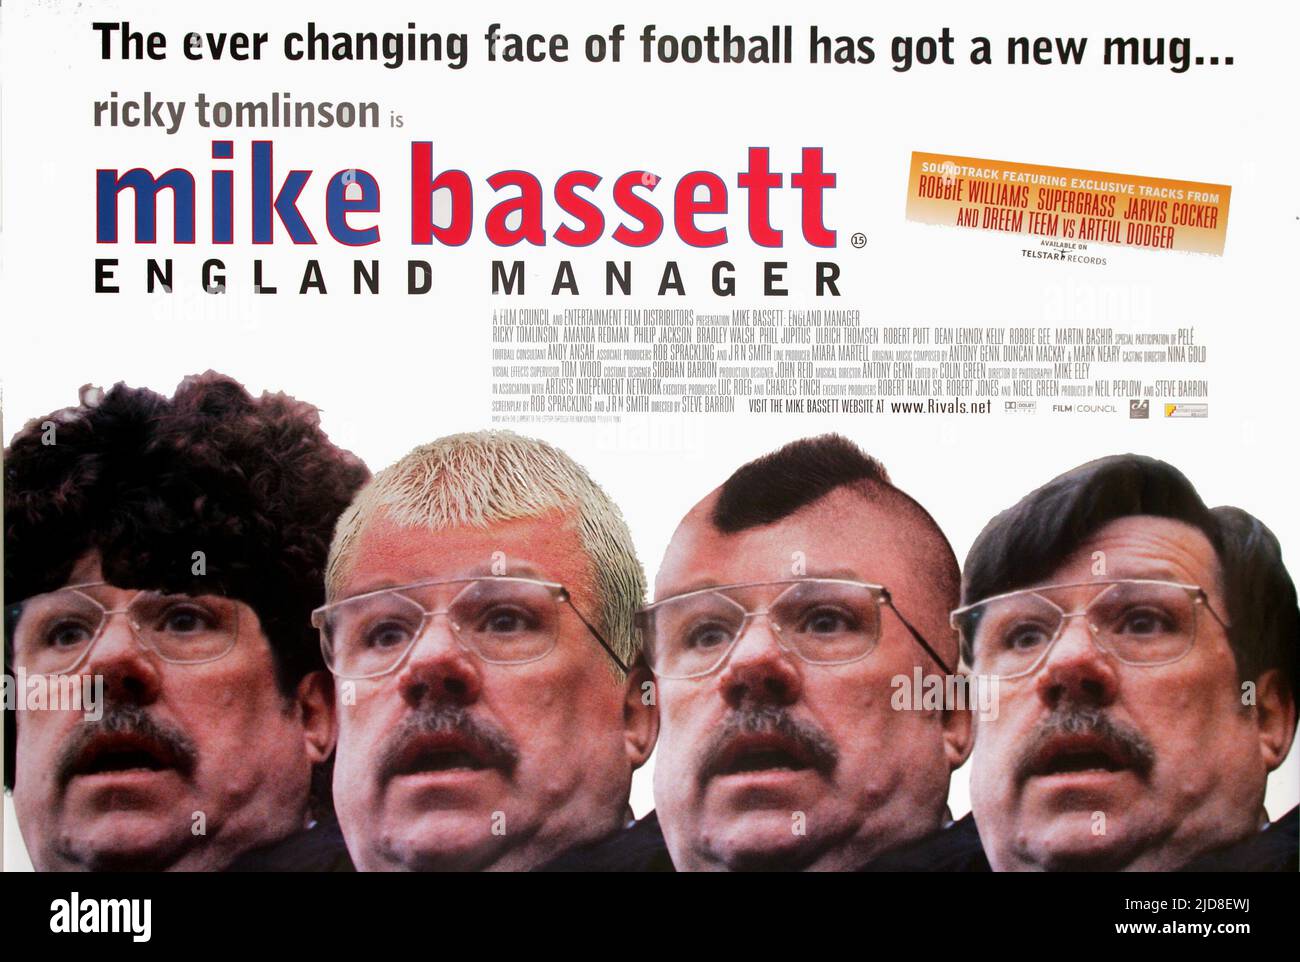 RICKY TOMLINSON POSTER, MIKE BASSETT: ENGLAND MANAGER, 2001, Stock Photo